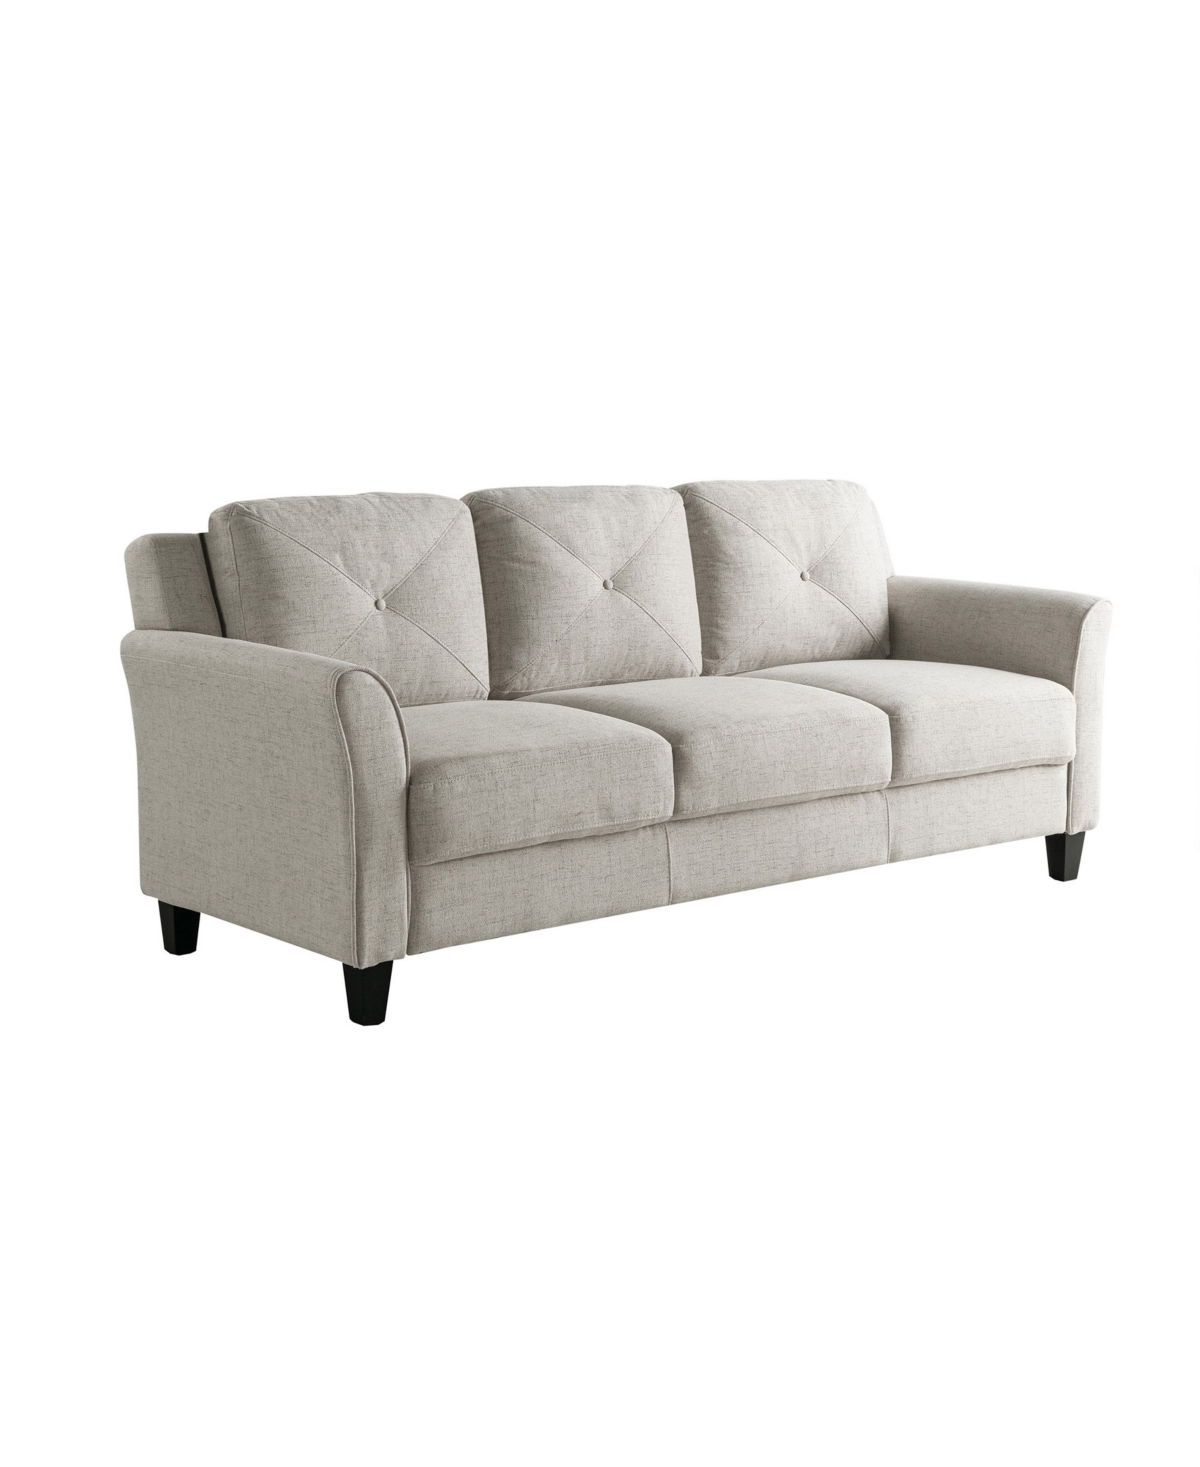 Shop Lifestyle Solutions 78.7" W Polyester Harvard Sofa With Curved Arms In Beige